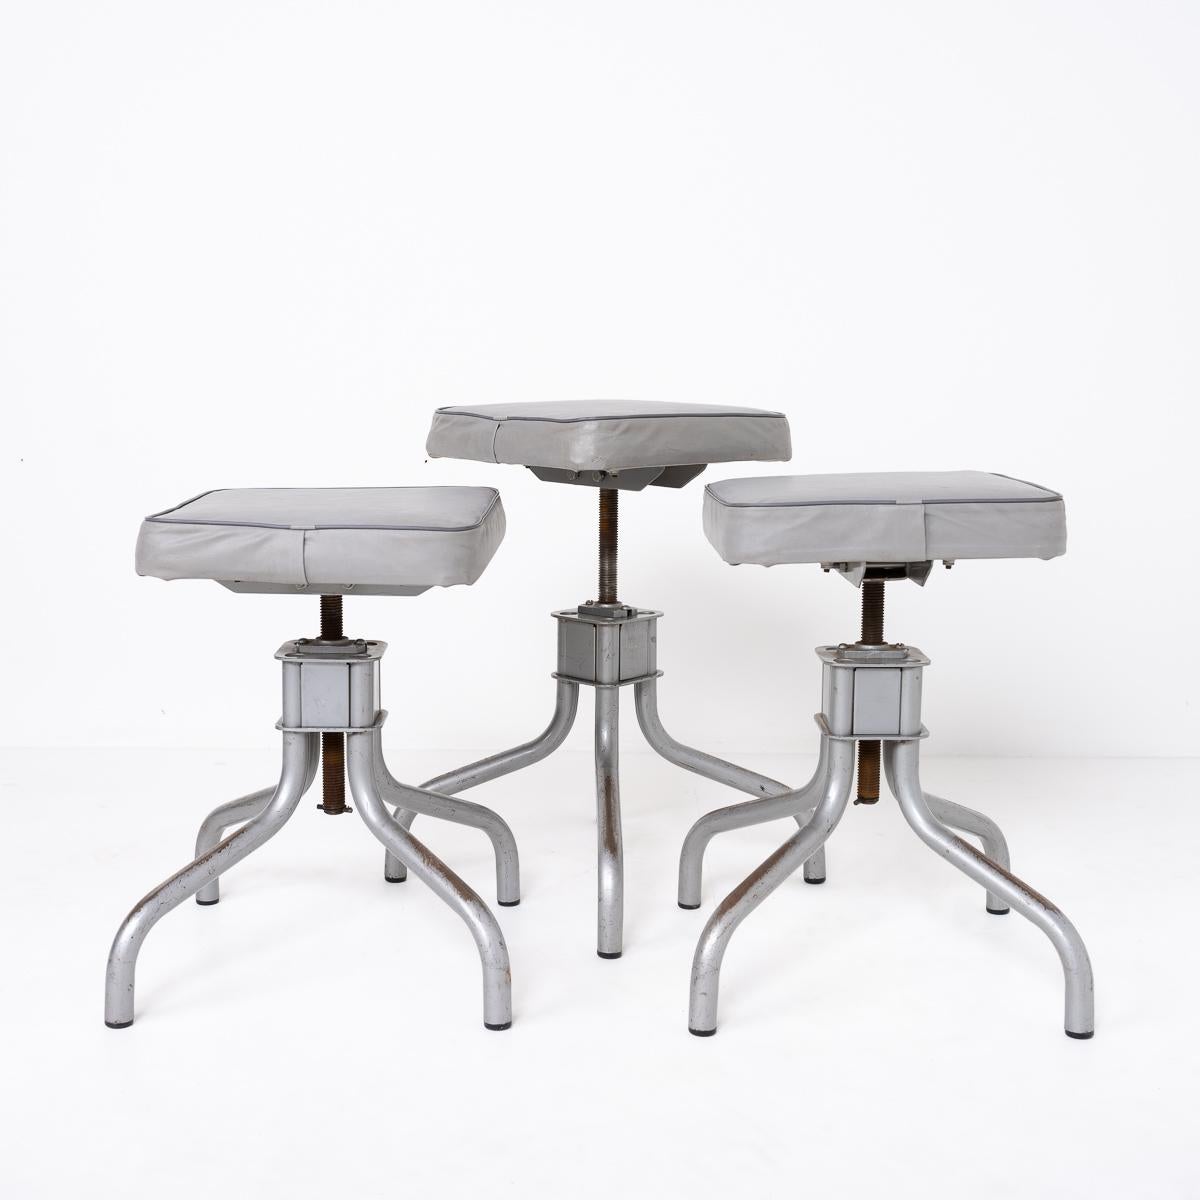 Reclaimed Industrial Factory Height Adjustable Stools By Leabank Chairs Ltd For Sale 7